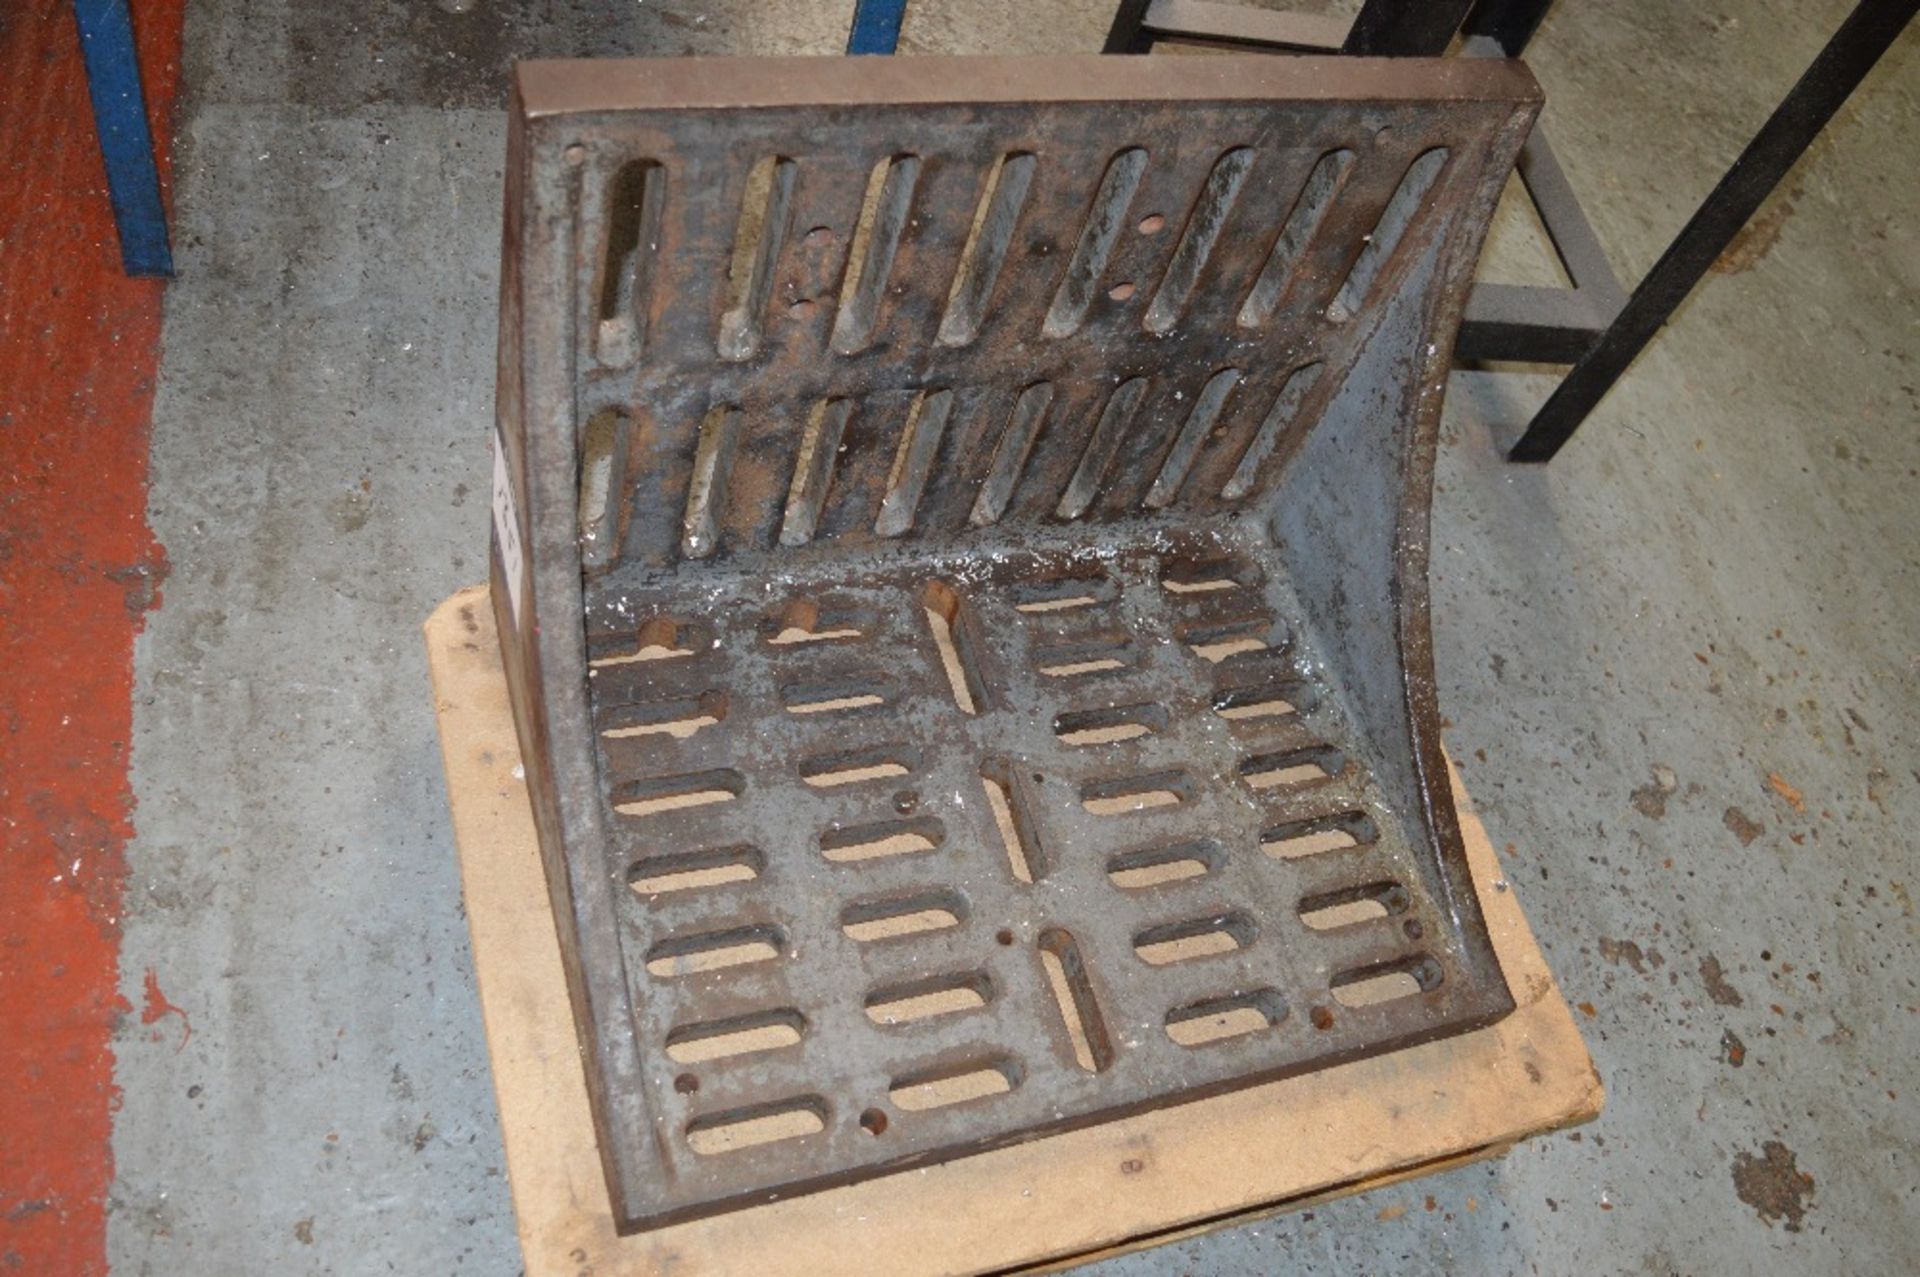 Angle Plate
61cm x 46cm (Located at Kent Rd)